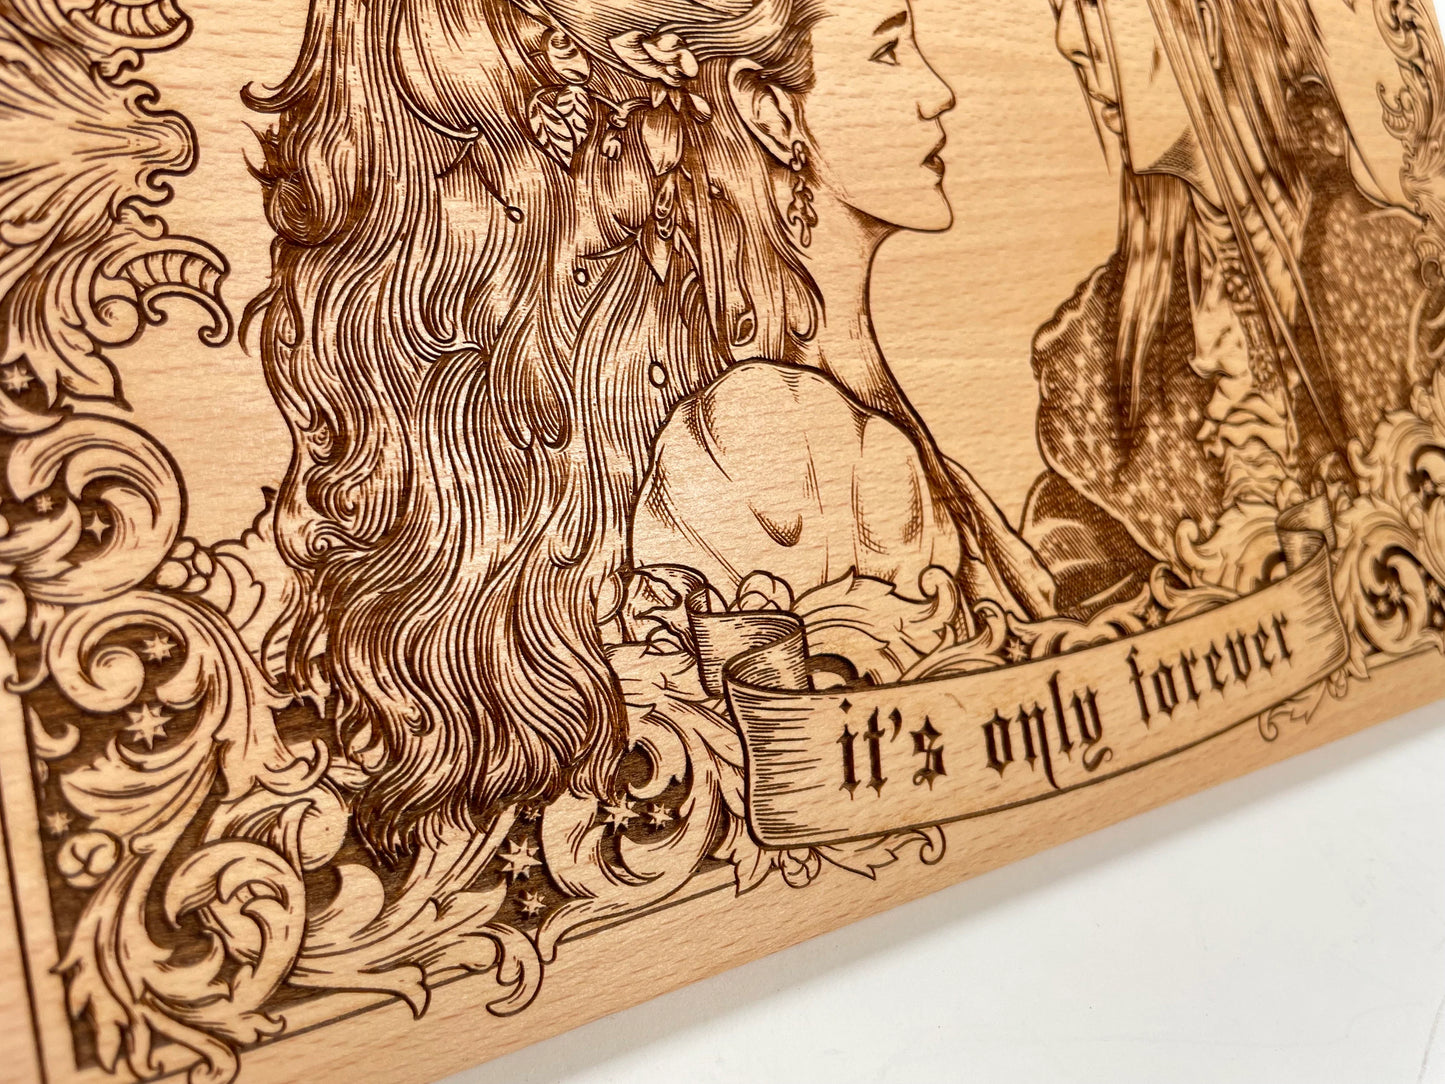 Labyrinth art, Labyrinth gift wall art engraved on solid wood. - Forgotten Engravings labyrinth-art-labyrinth-gift-wall-art-engraved-on-solid-wood, David bowie labyrinth, Divination Tools, en